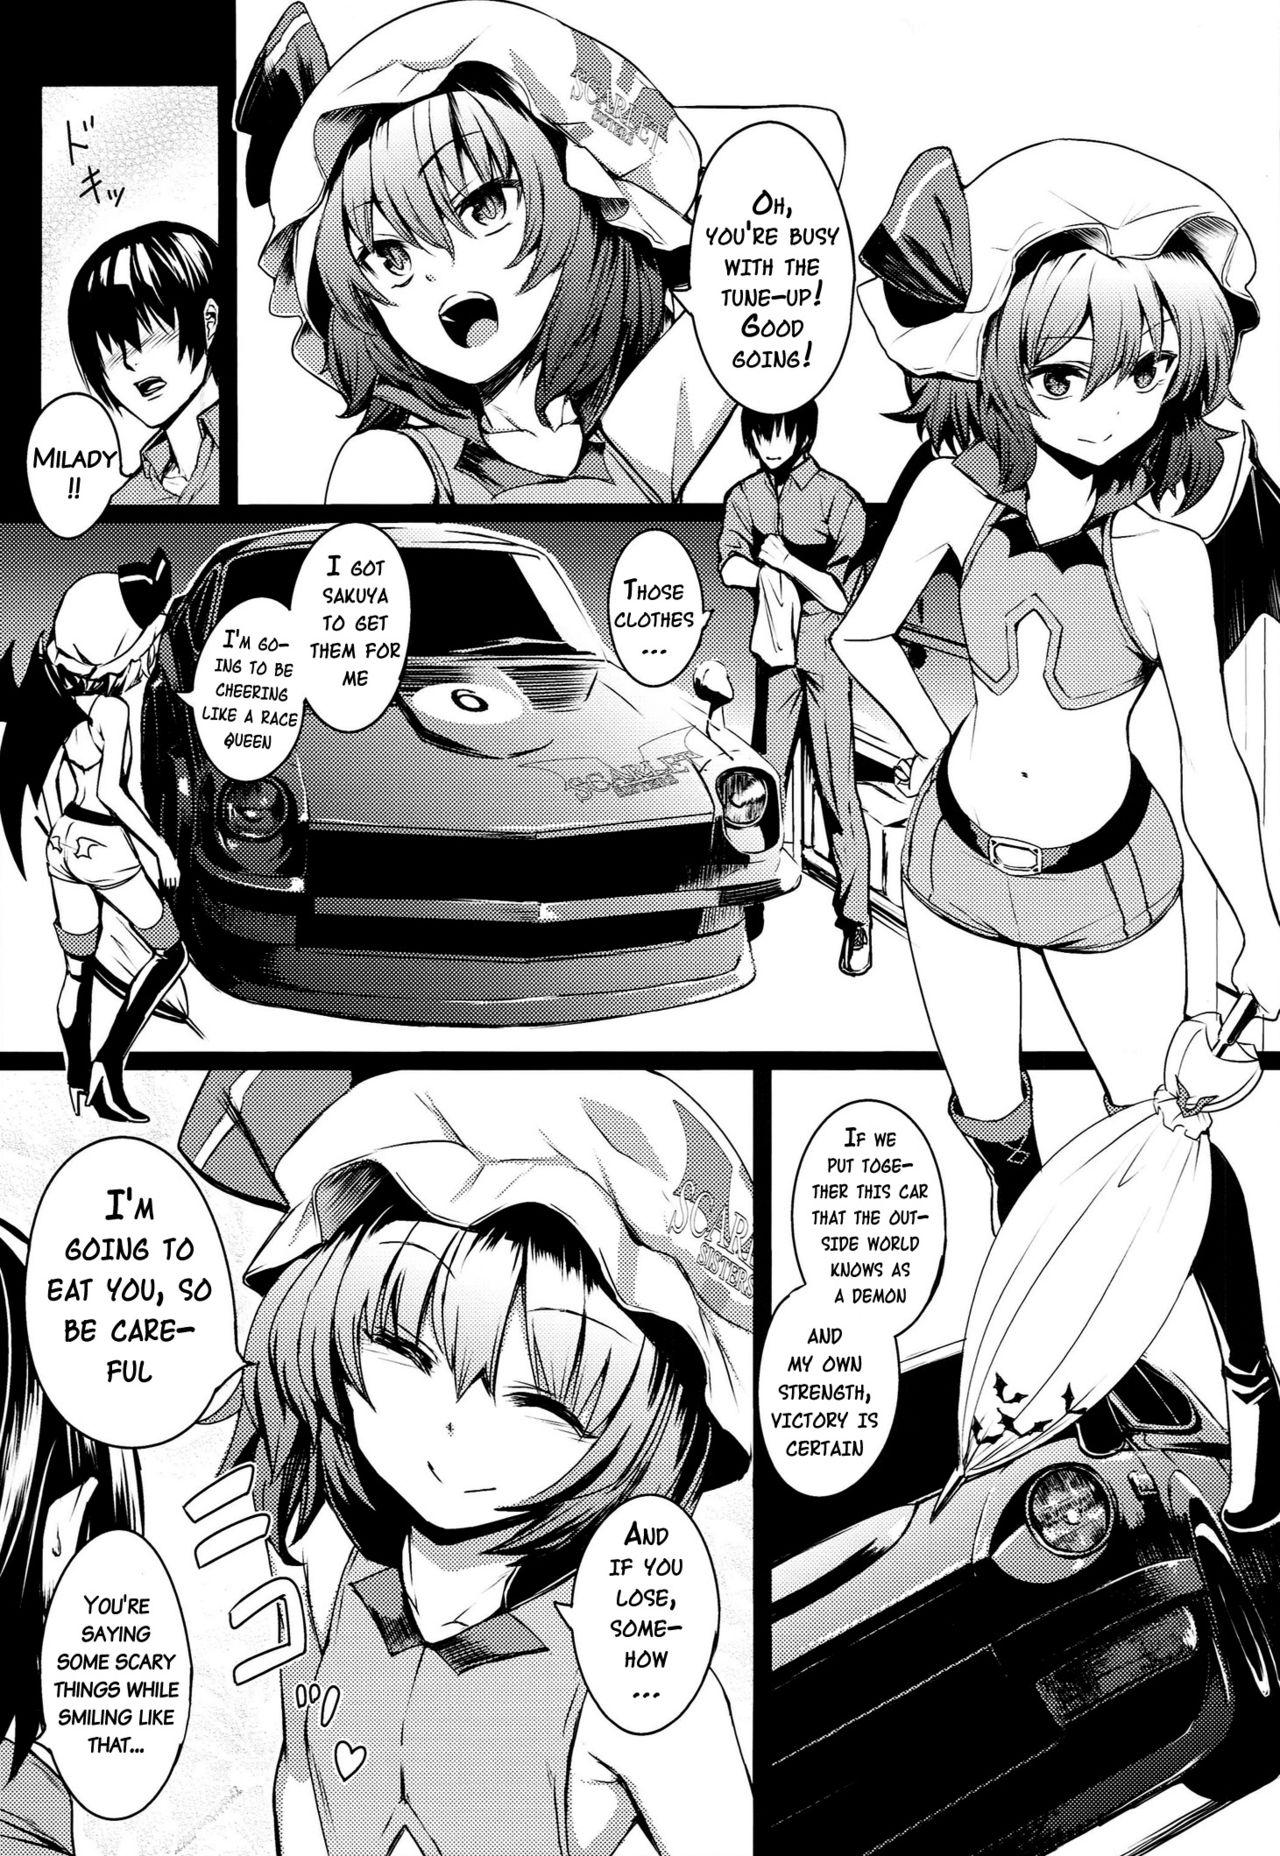 Soapy Massage TOUHOU RACE QUEENS COLLABO CLUB - Touhou project Chilena - Page 4